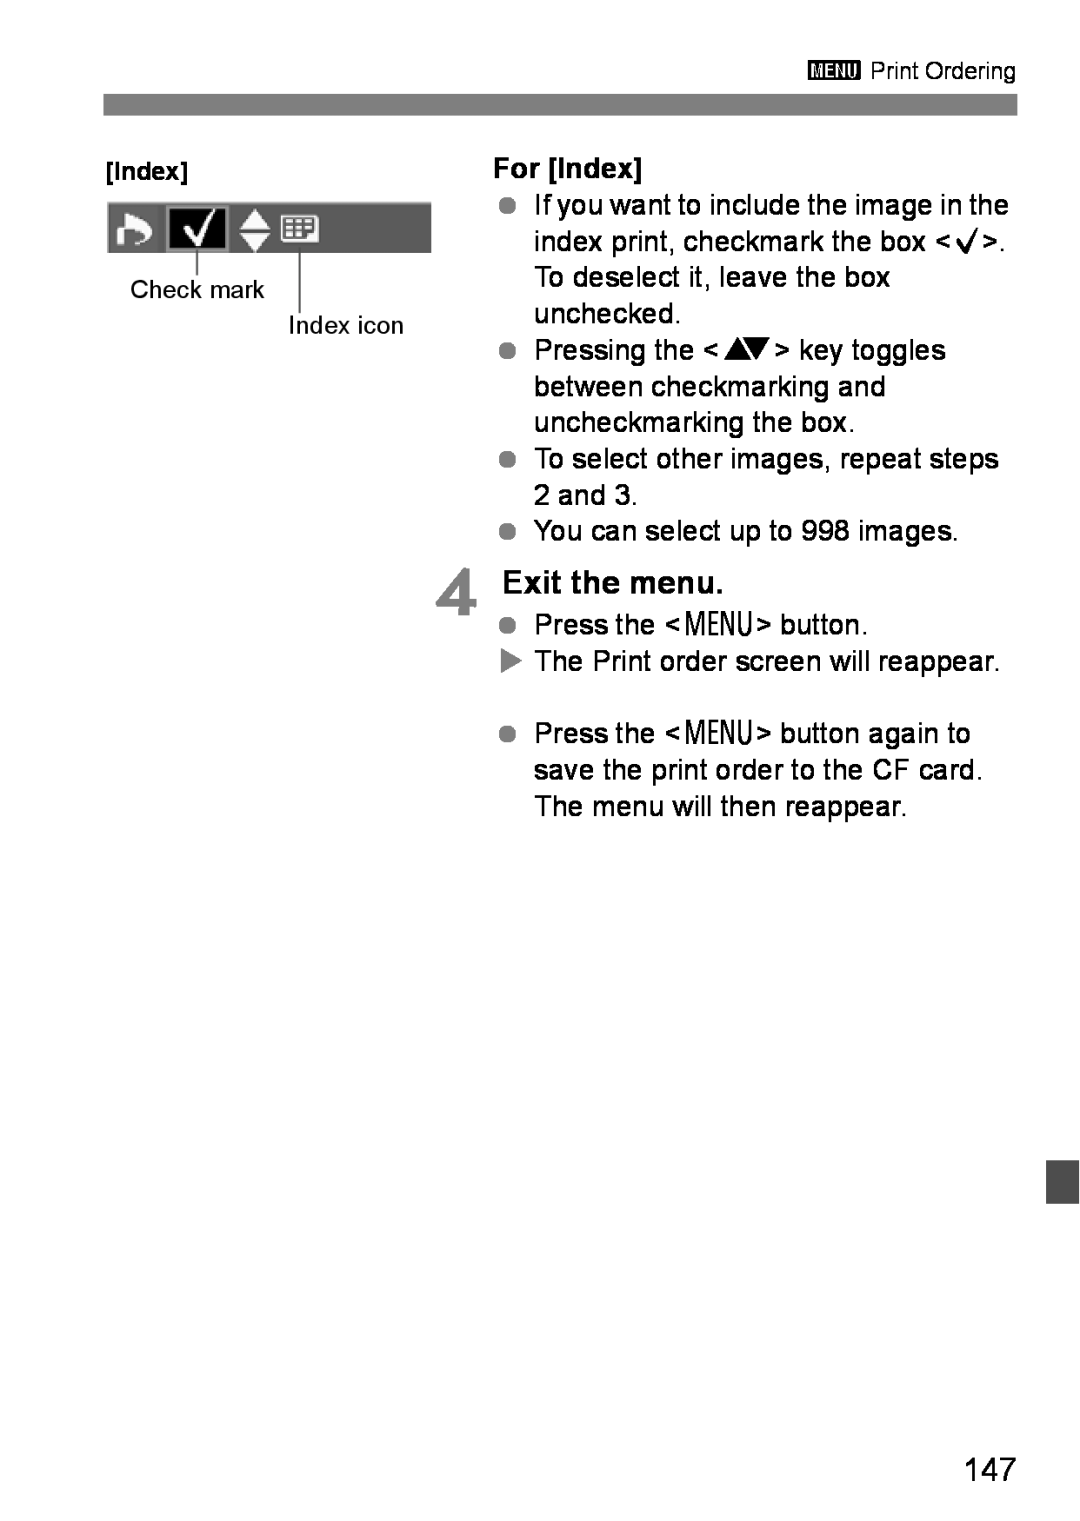 Canon EOS DIGITAL REBEL XTI instruction manual Exit the menu, For Index 